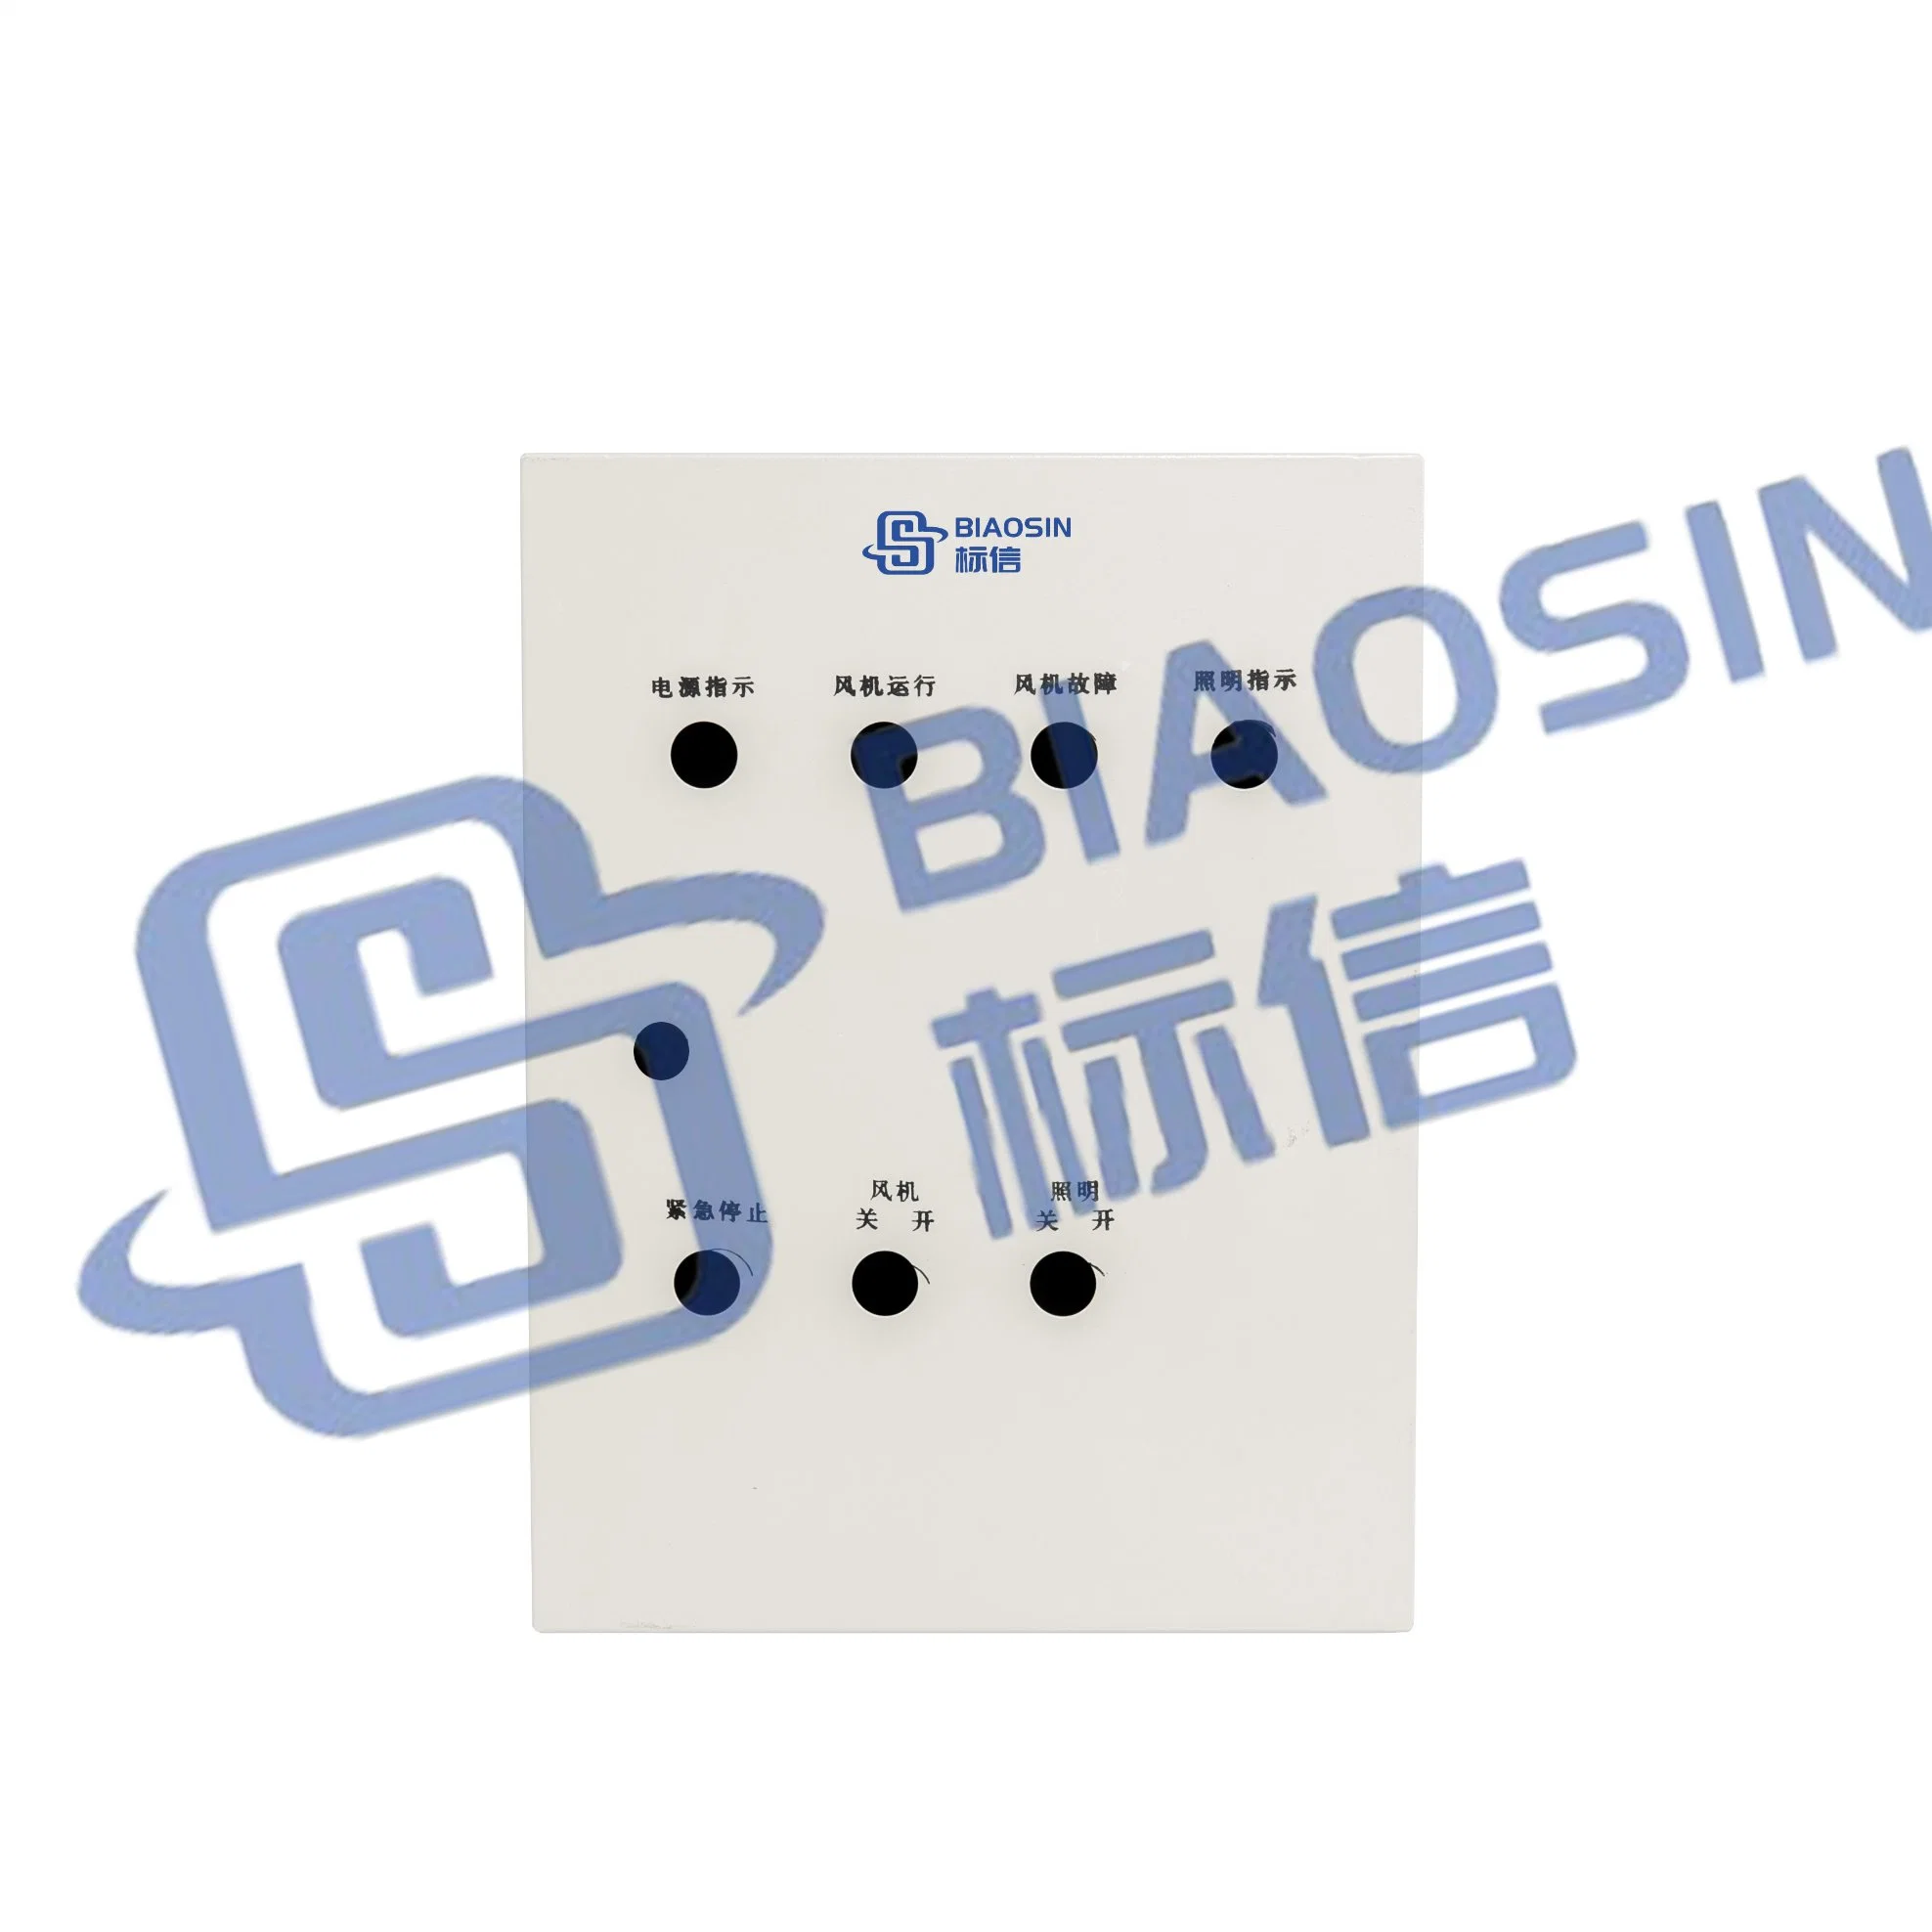 The Electric Control Box Can Be Used for Industrial